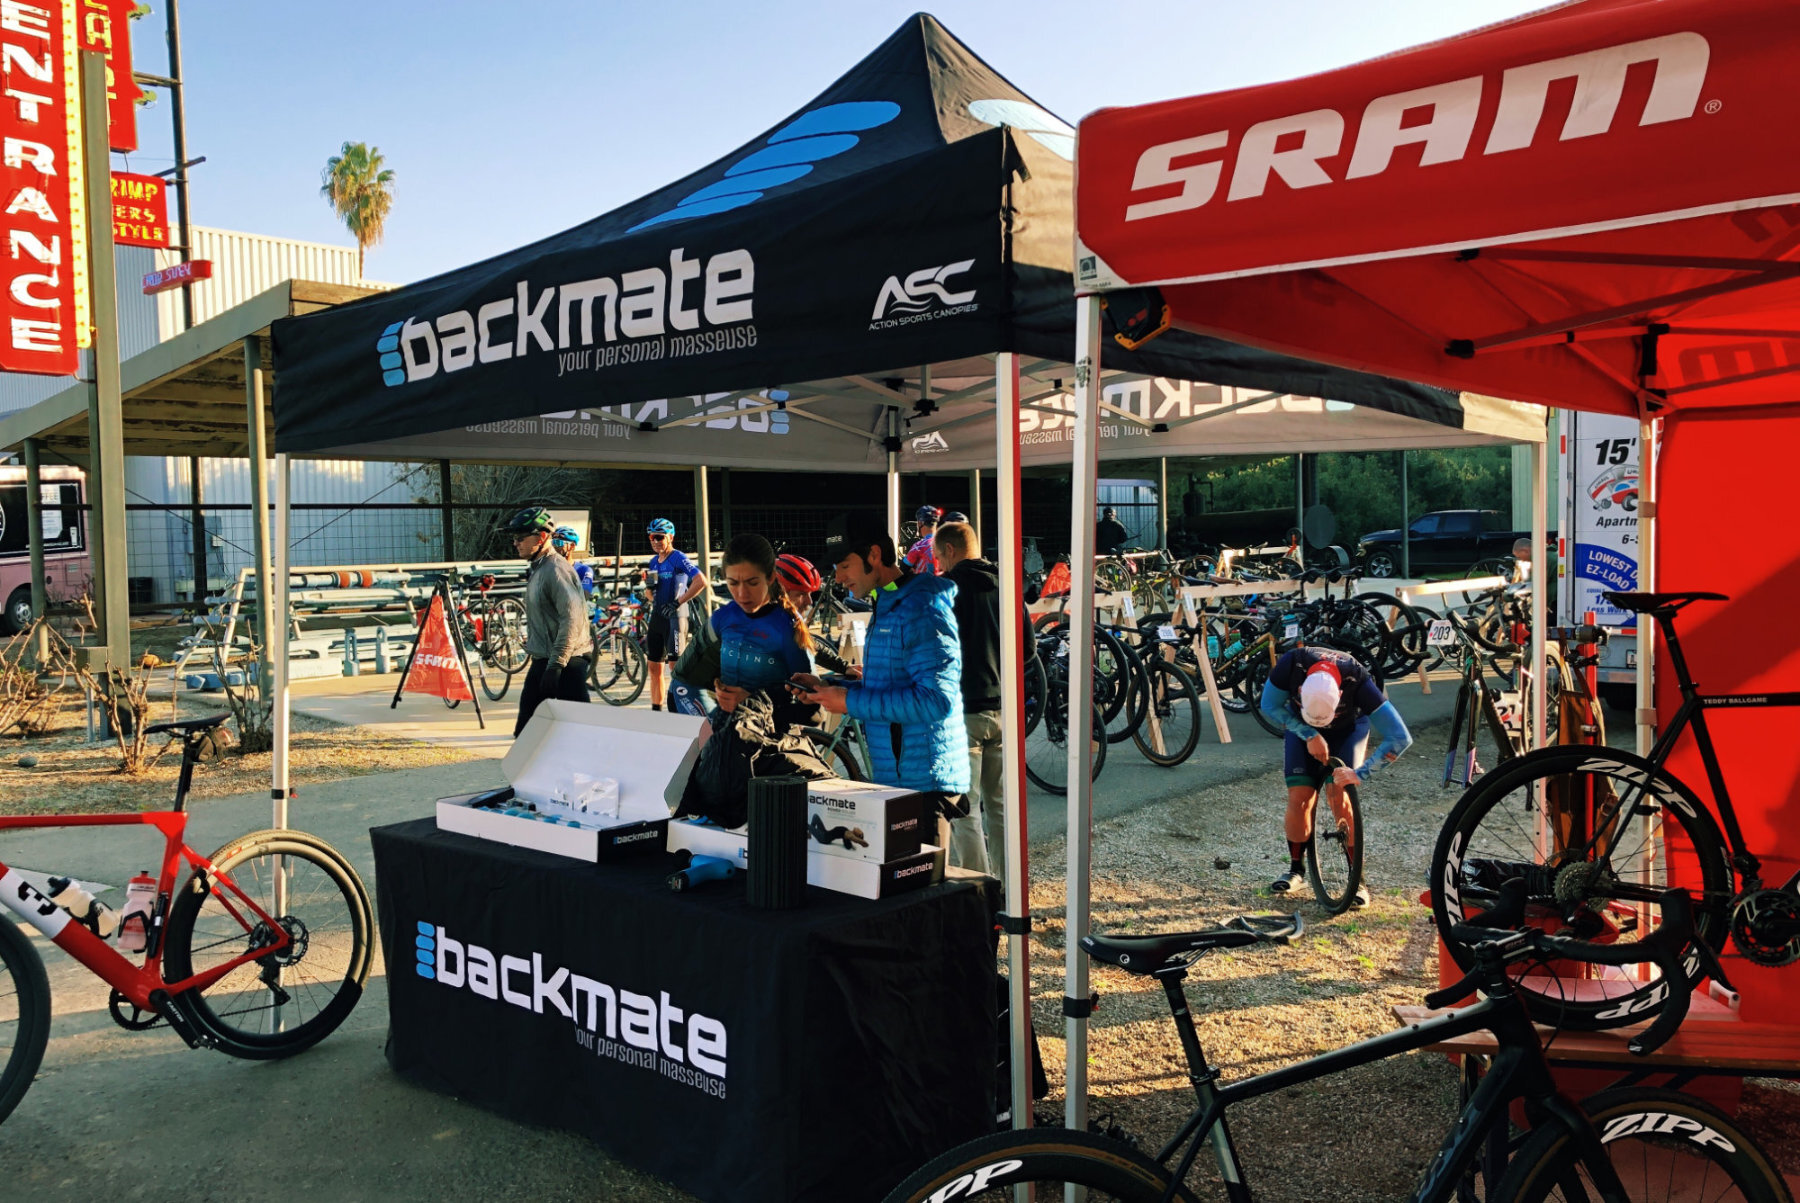   Backmate , a local company that specializes in creating innovative recovery, stimulation, stretching and strengthening products for athletes was a key event sponsor.  